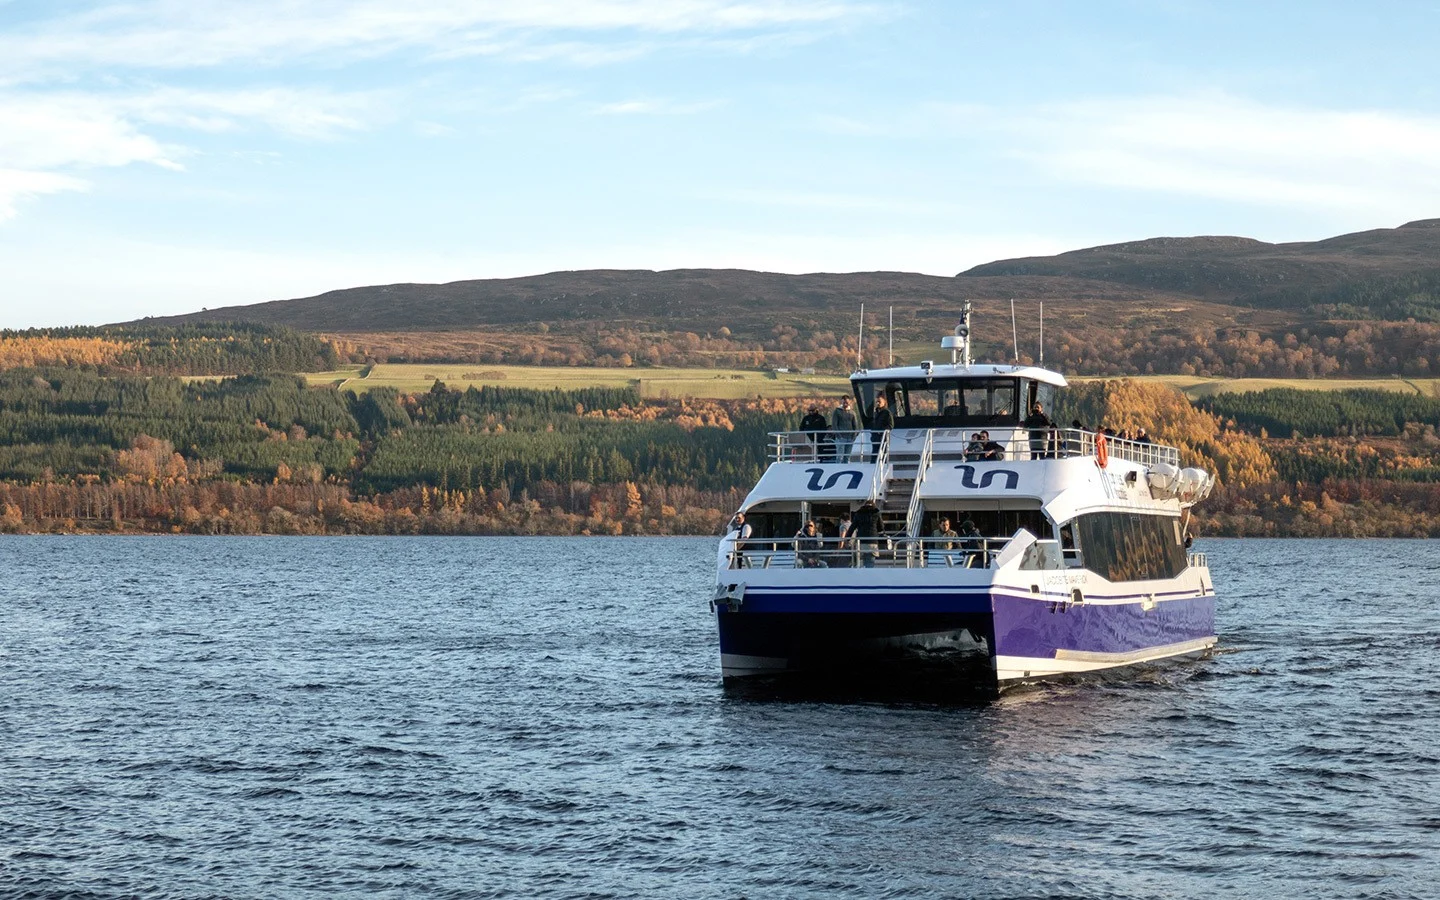 A boat trip with Jacobite cruises on Loch Ness near Inverness